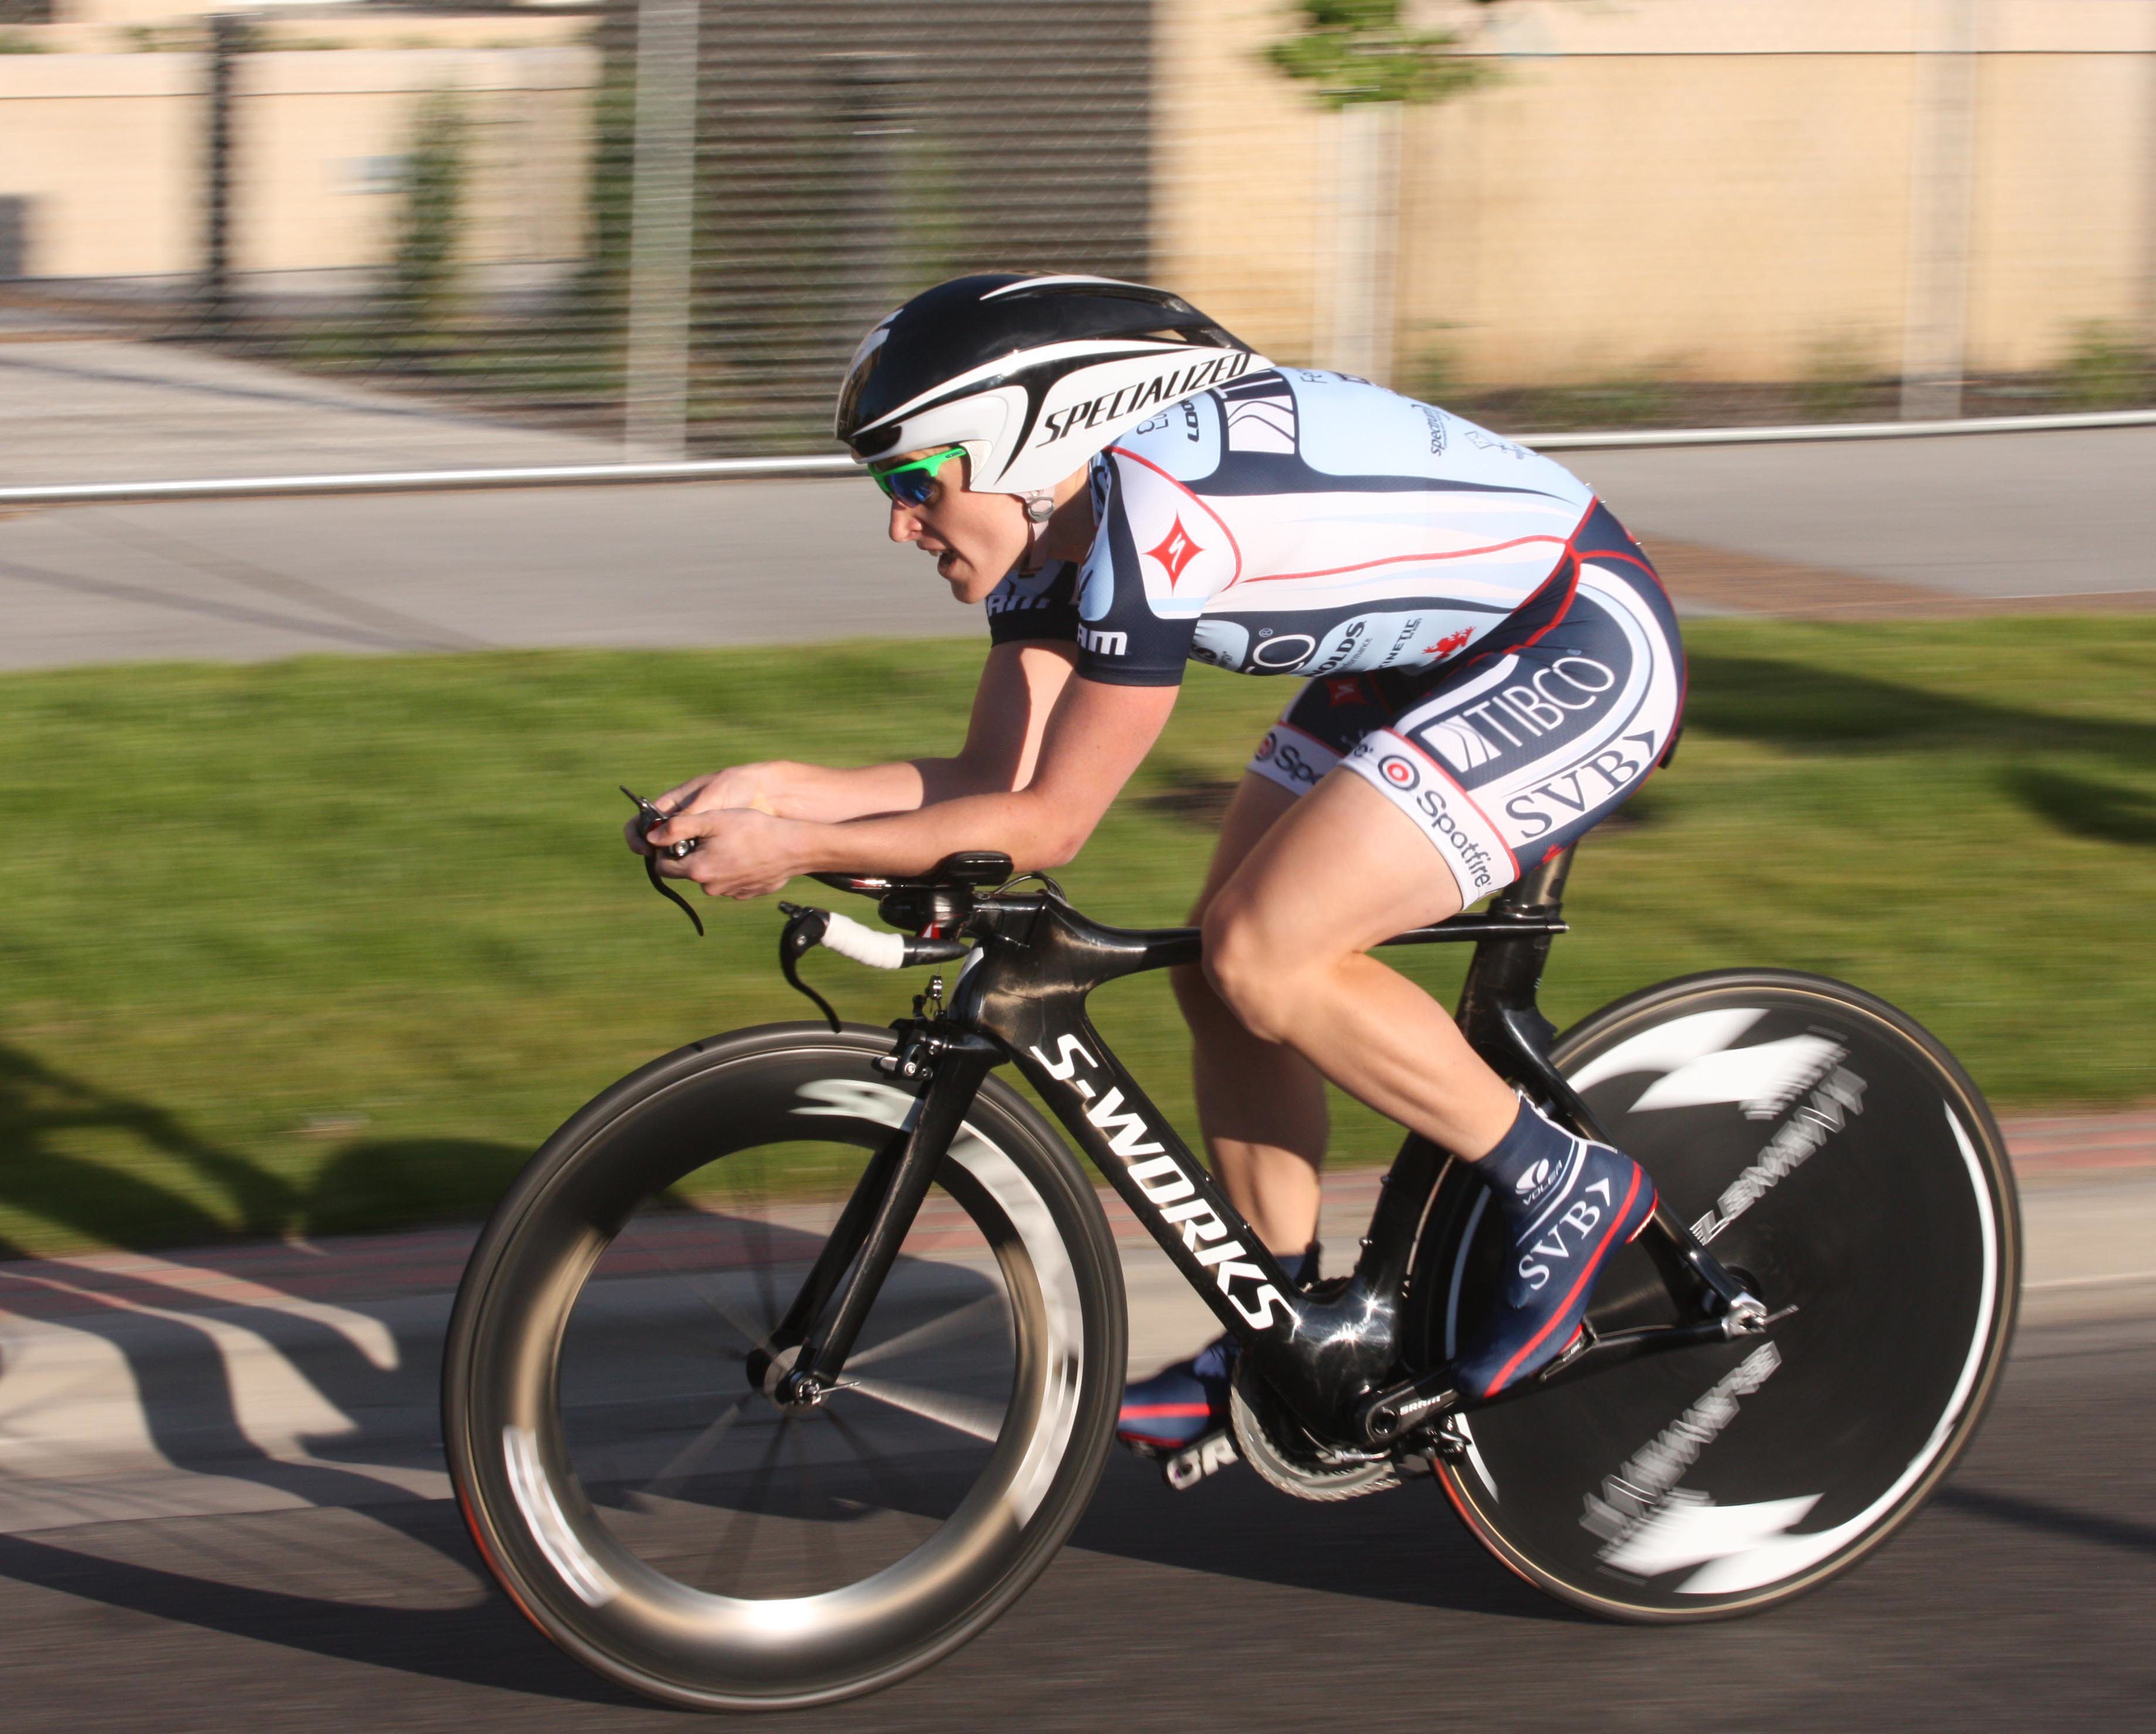 Tara Whitten during a time trial race in 2012.